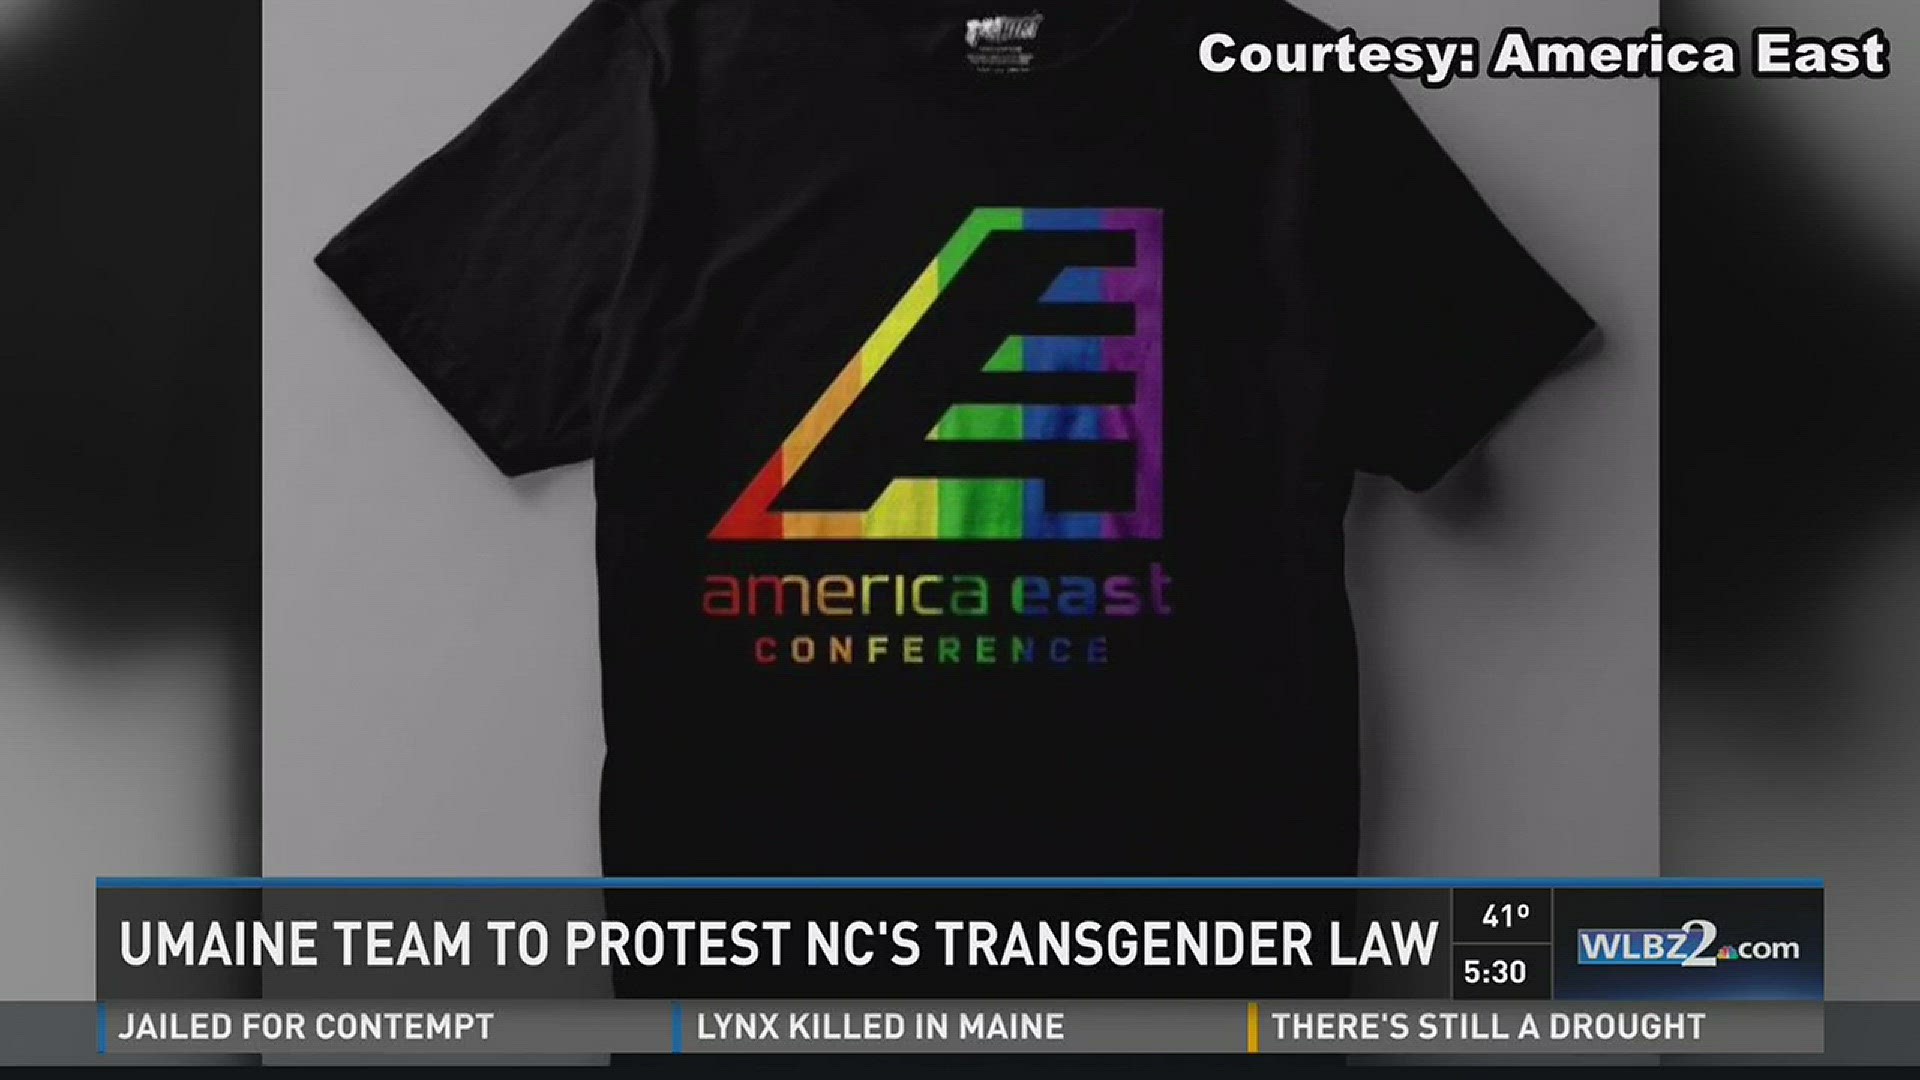 UMaine team to protest NC's transgender law